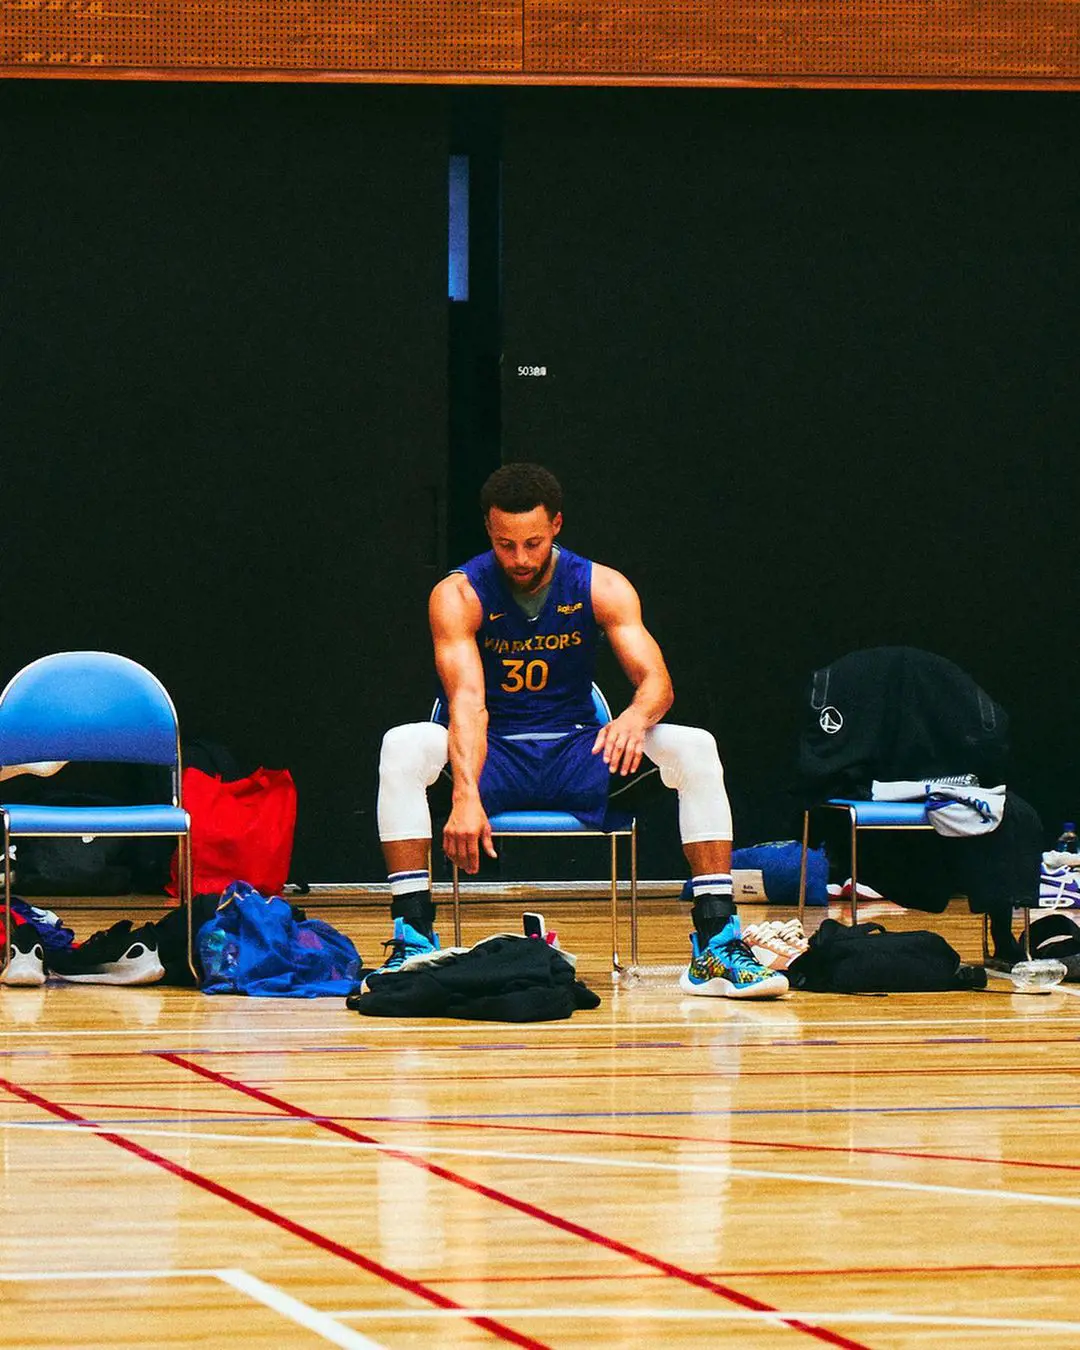 One of the all-time greats Steph Curry also has relatively flat feet